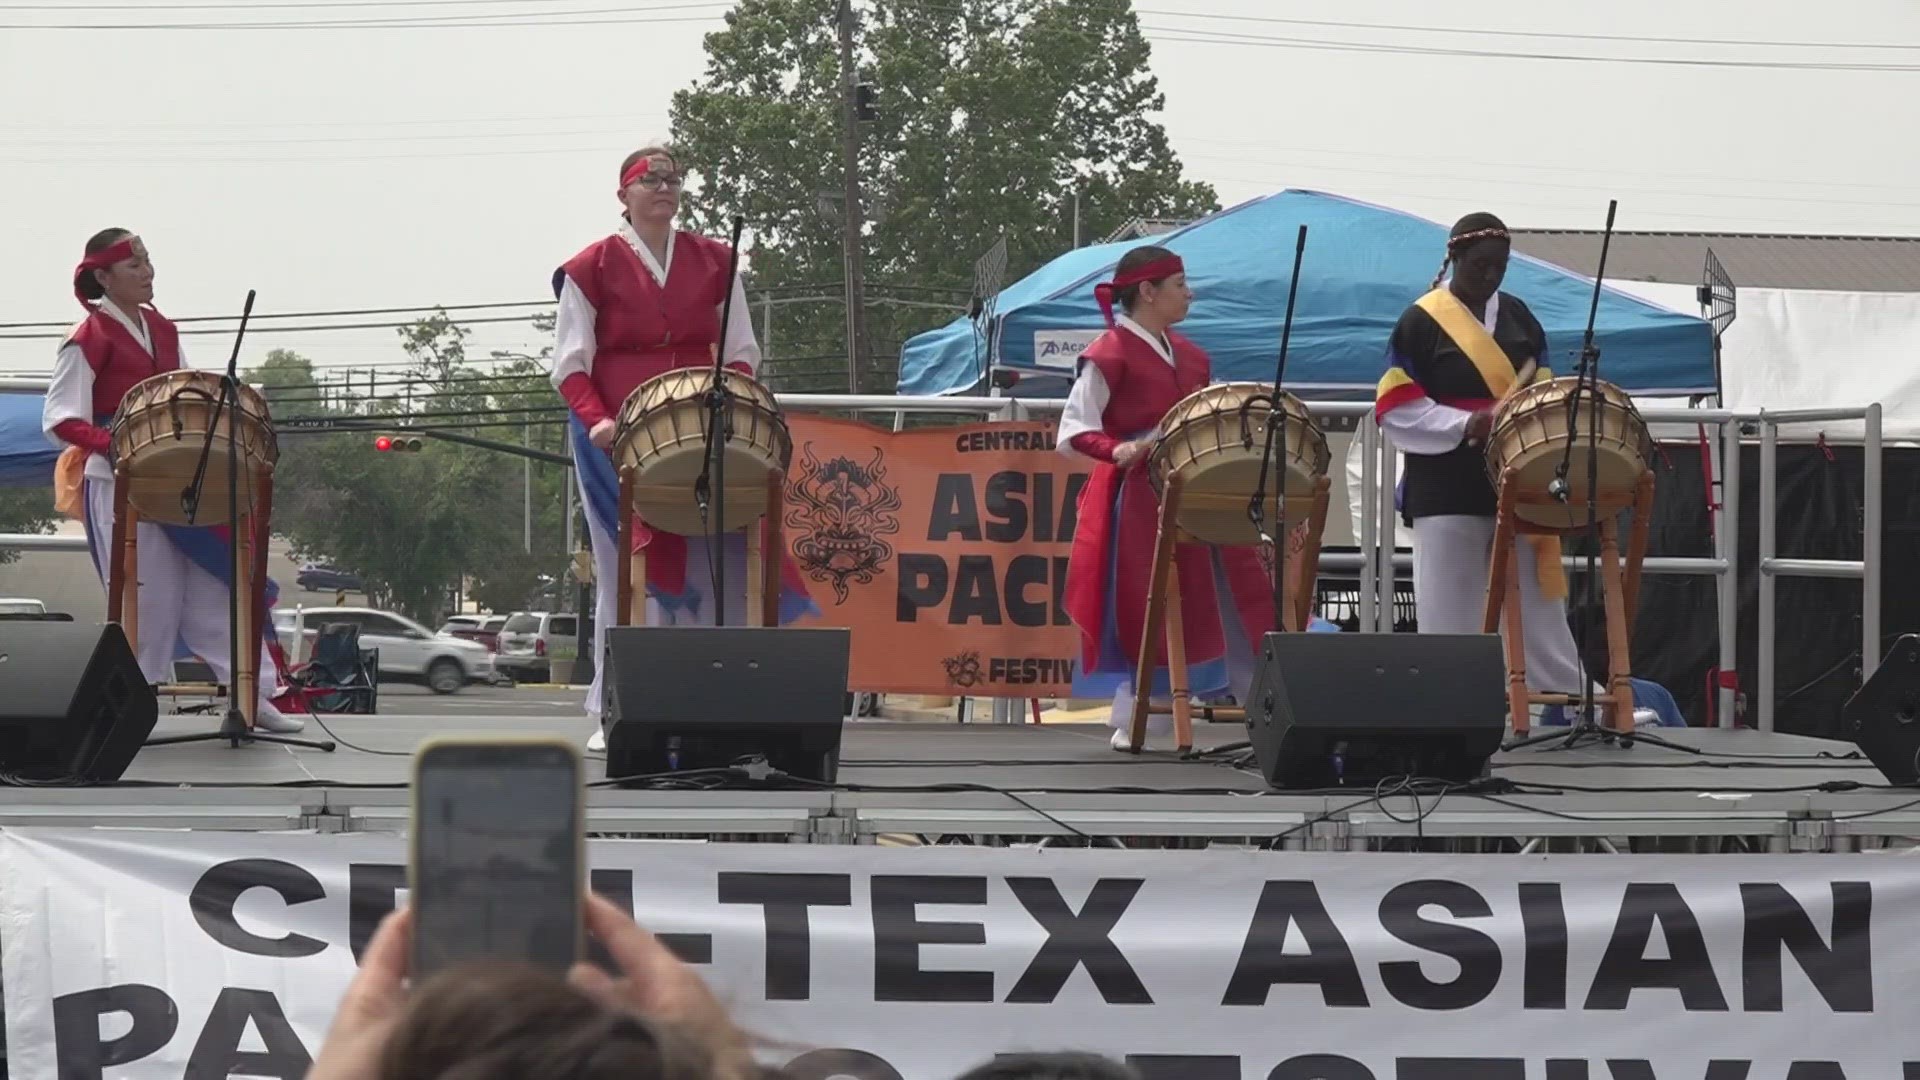 The festival was filled with cultural food, performances and vendors from across Texas.